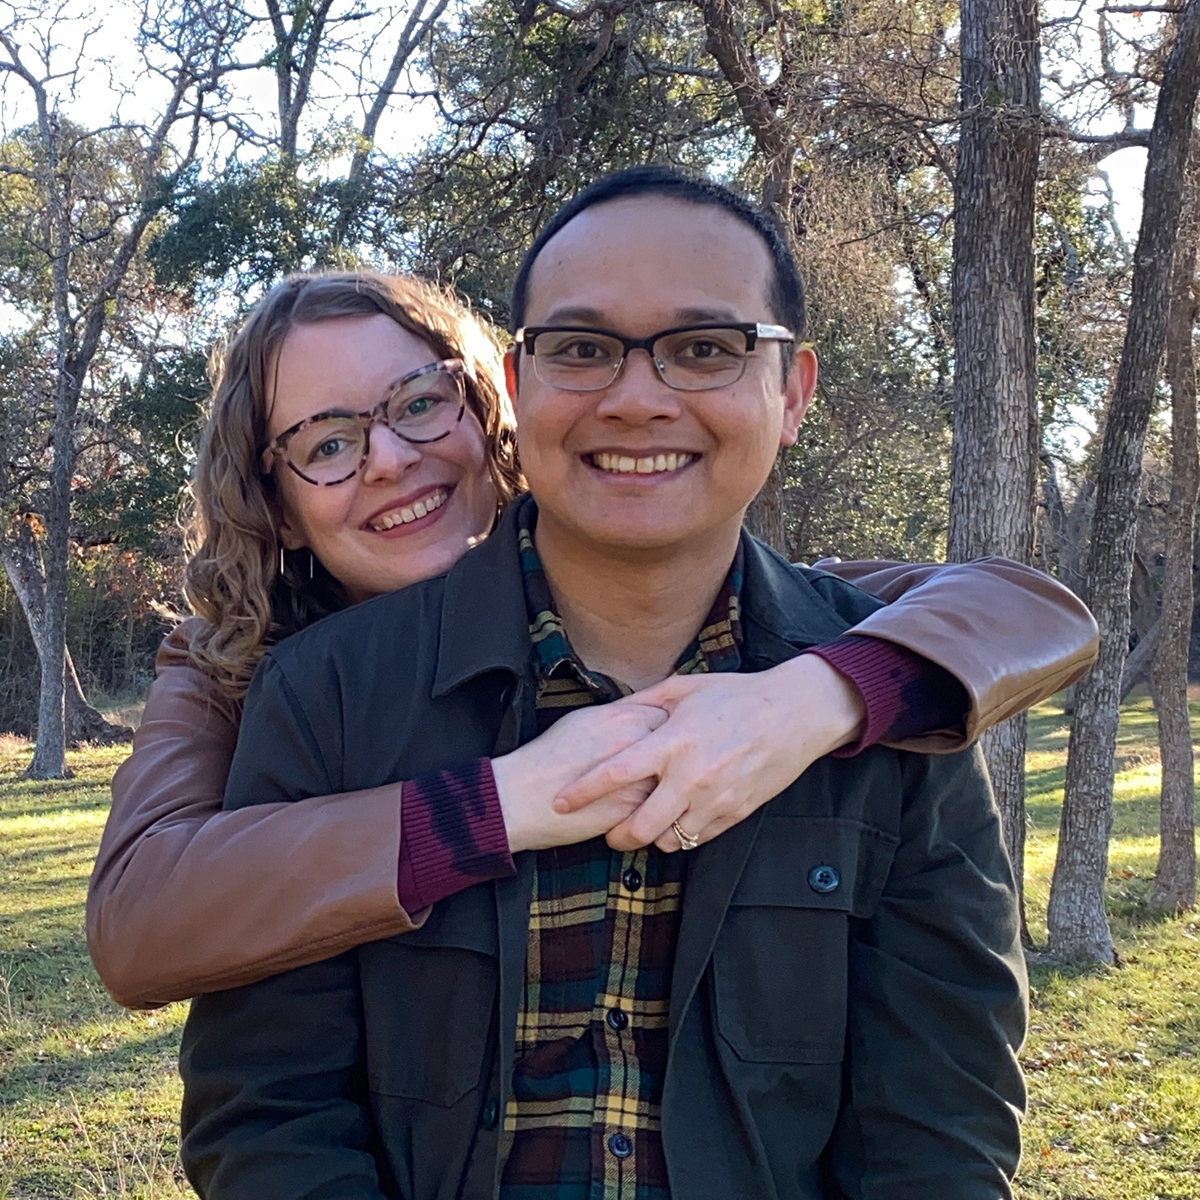 cedar park, texas married couple looking to adopt